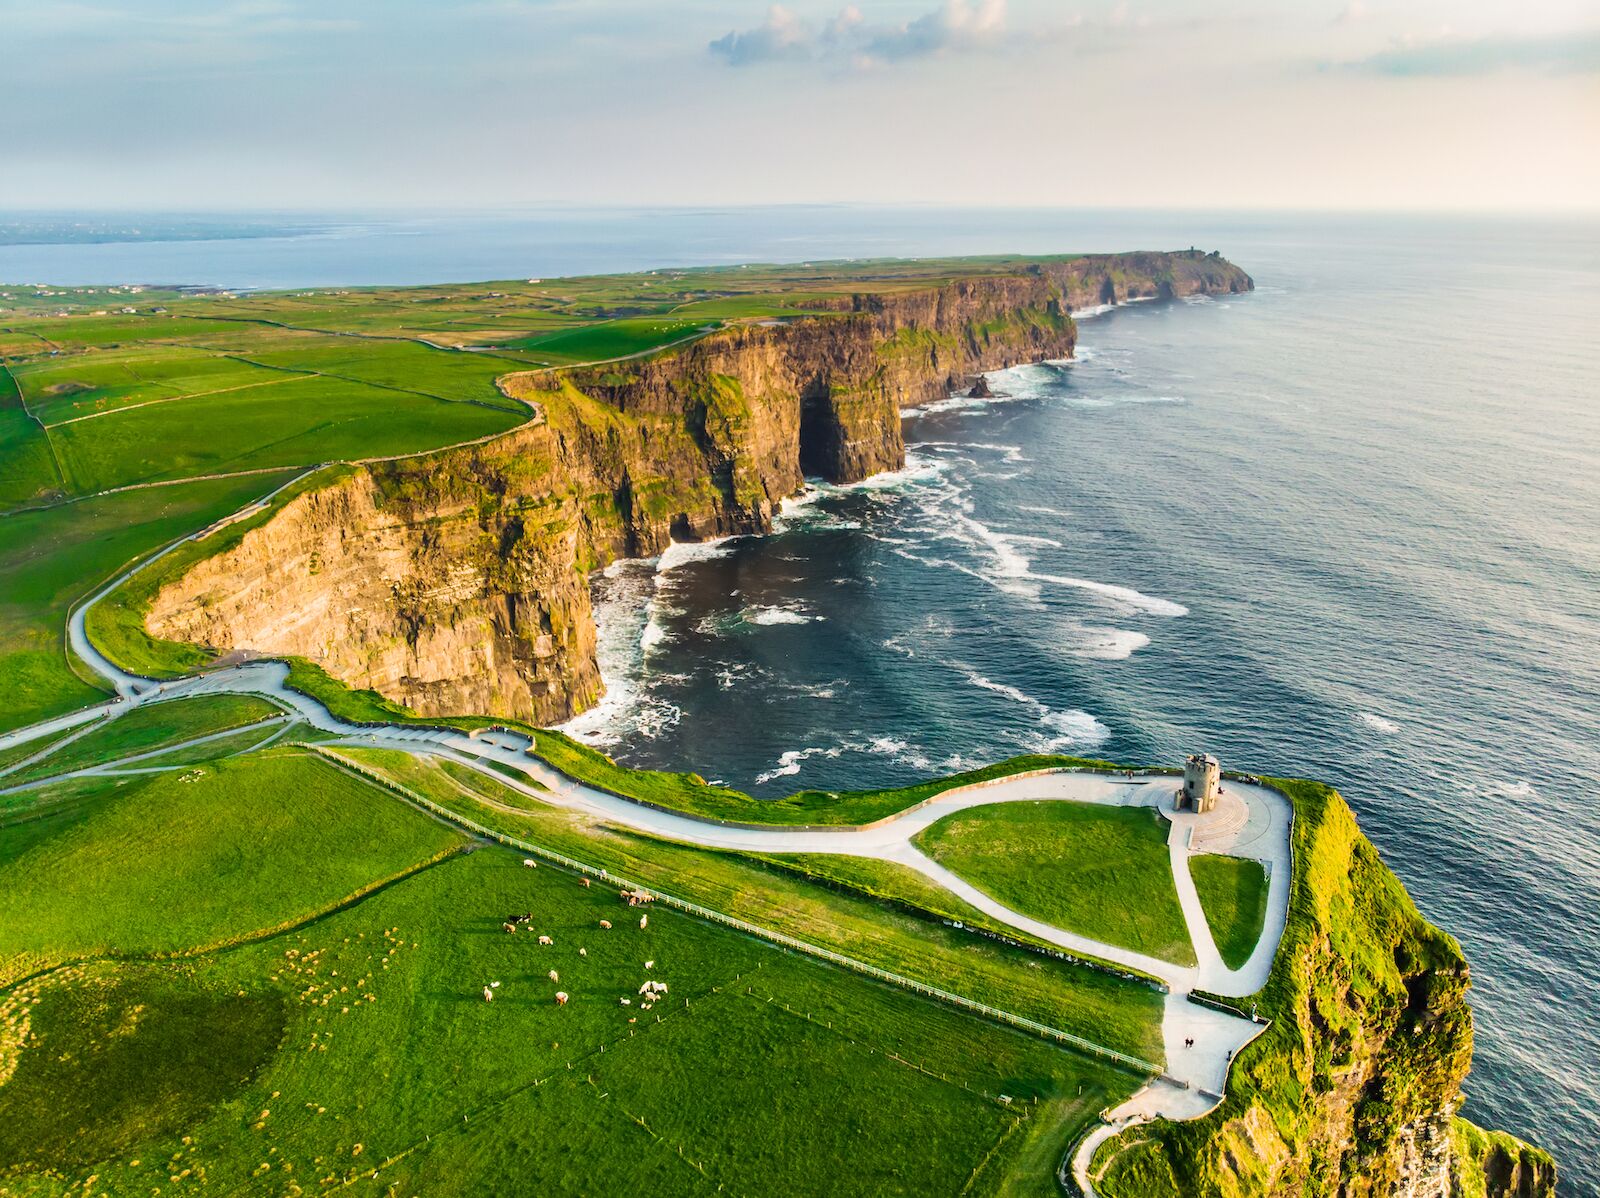 Cliffs of Moher paved pathway and O'Brien's Tower